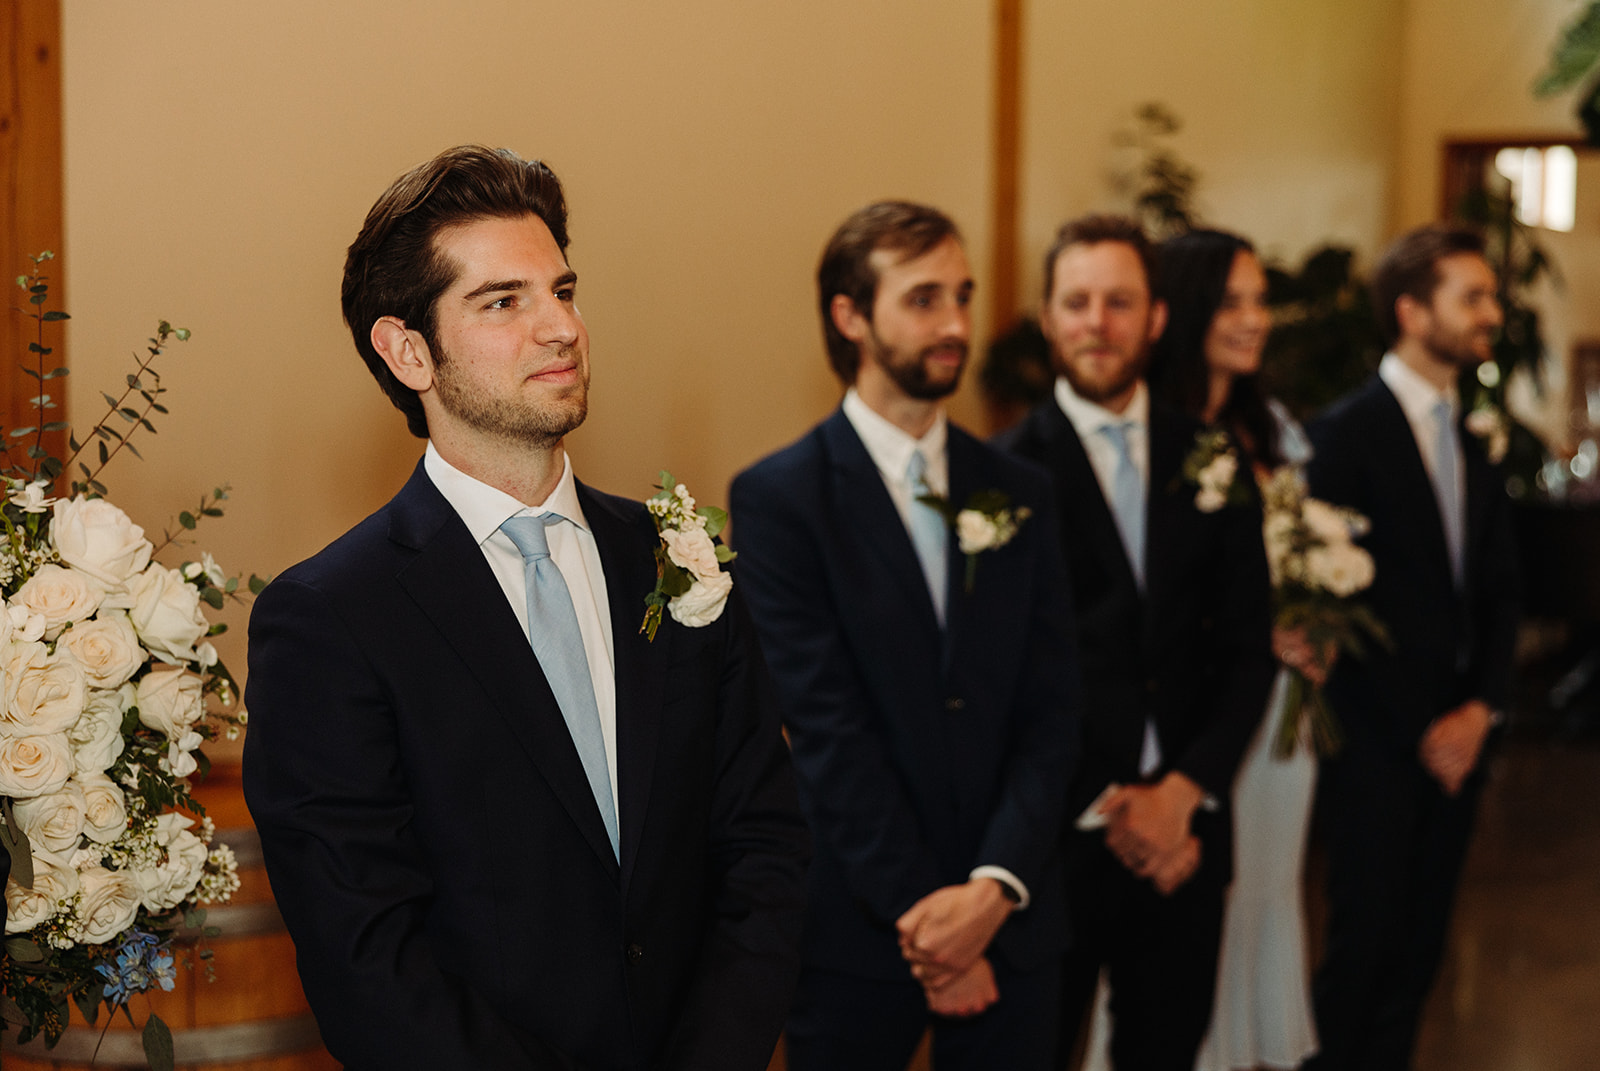 Groom and groomsmen standing at the altar